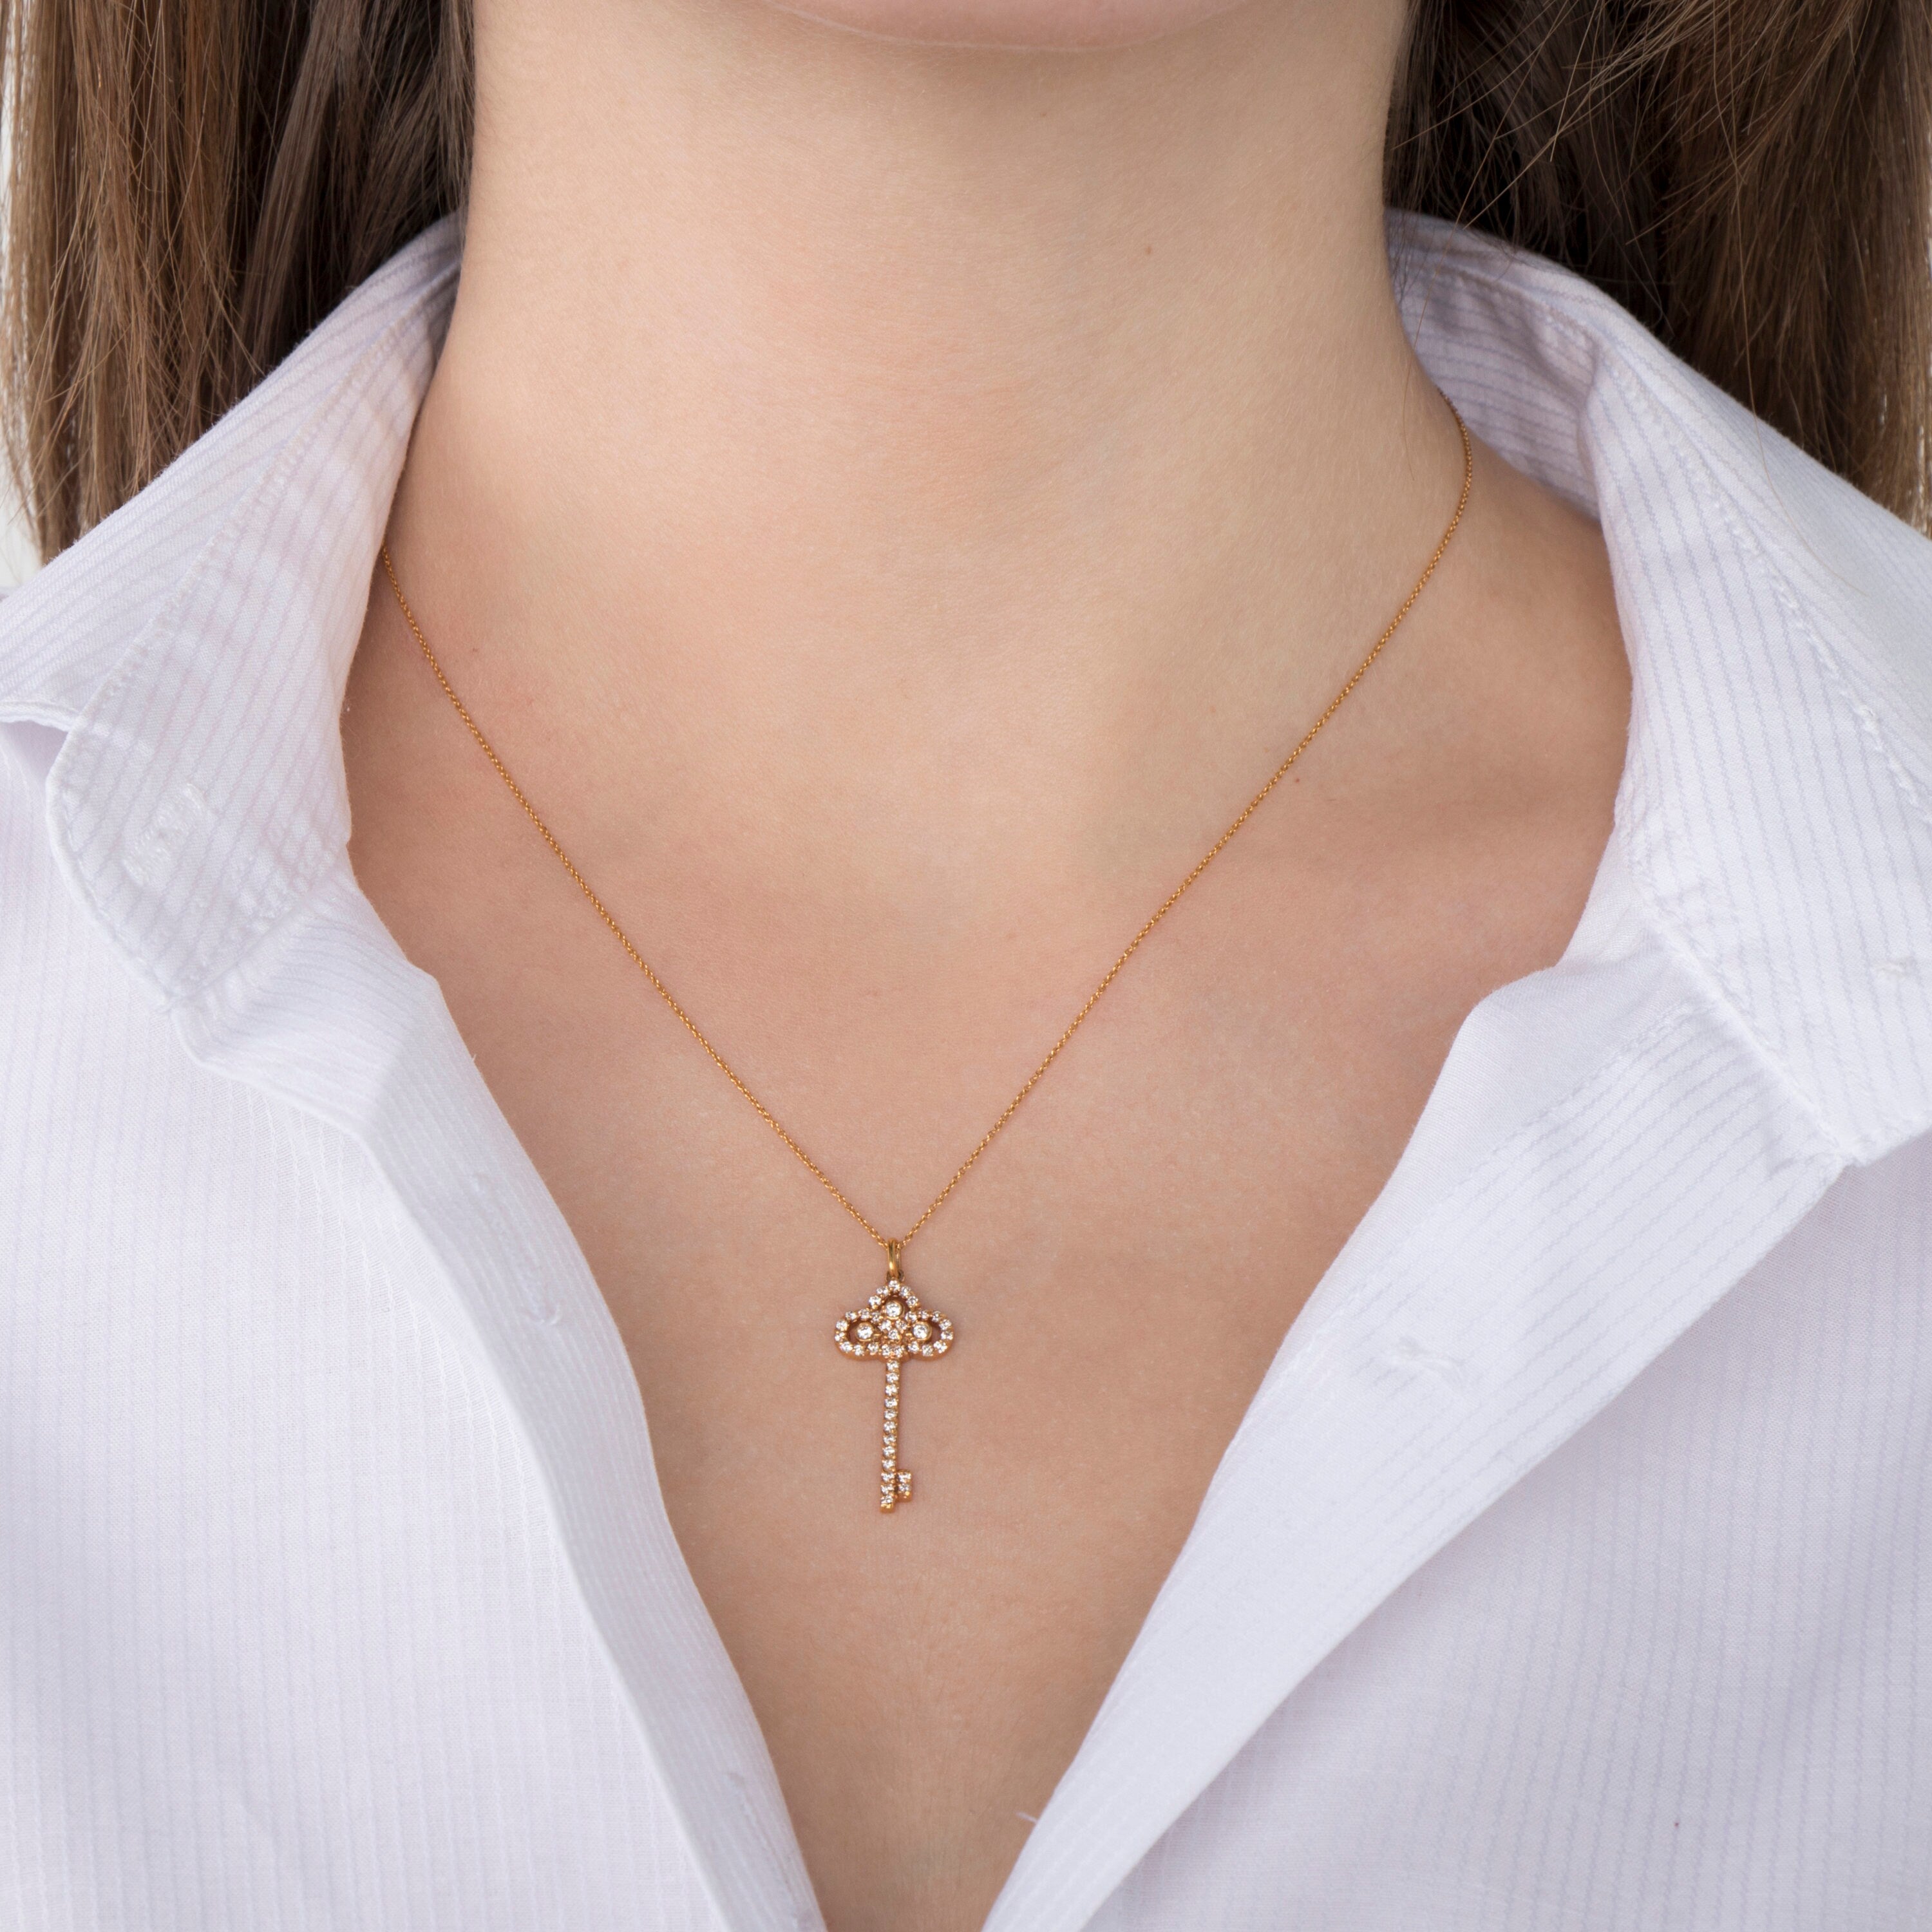 Diamond Key Pendant Necklace Available in 14K and 18K Gold